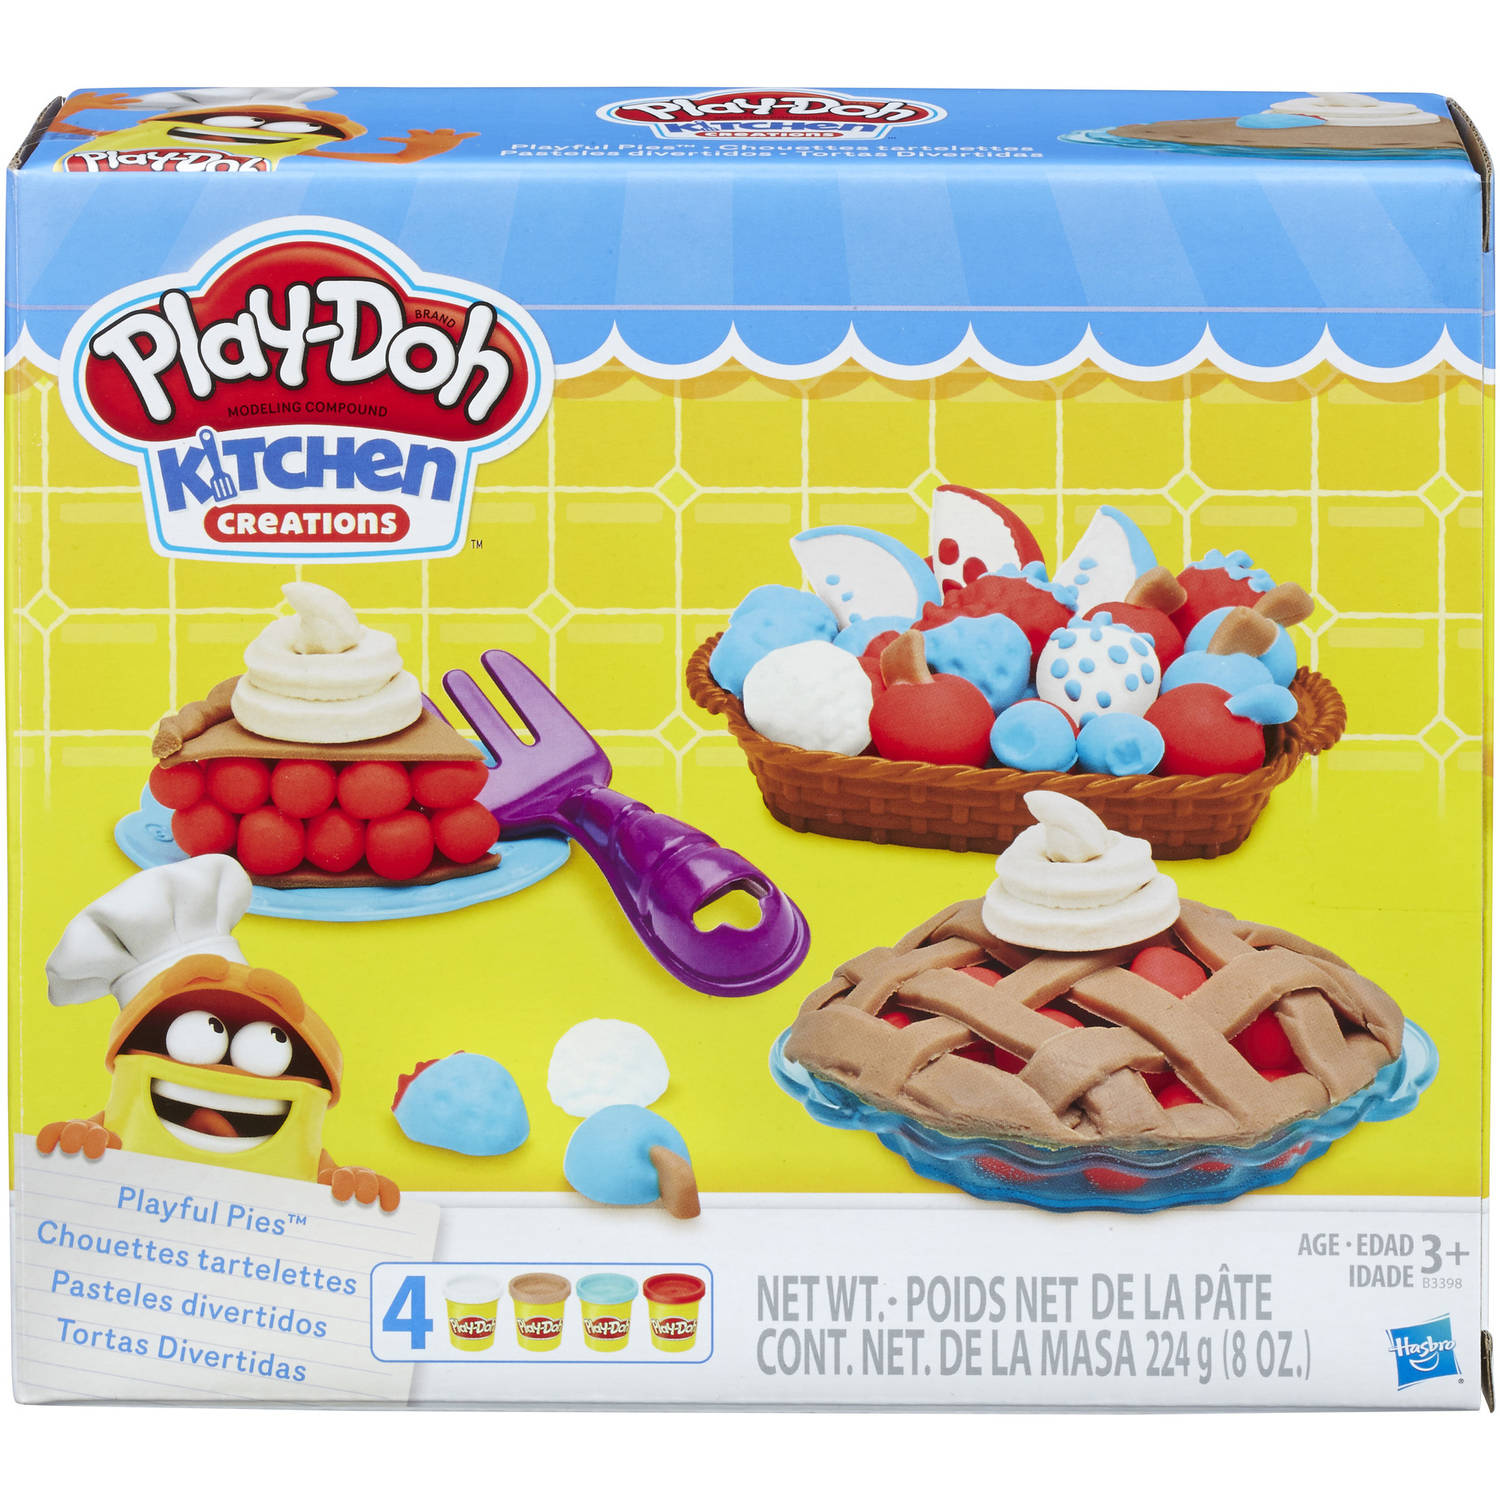 Play-Doh Kitchen Creations Playful Pies Set with 4 Cans - image 1 of 4